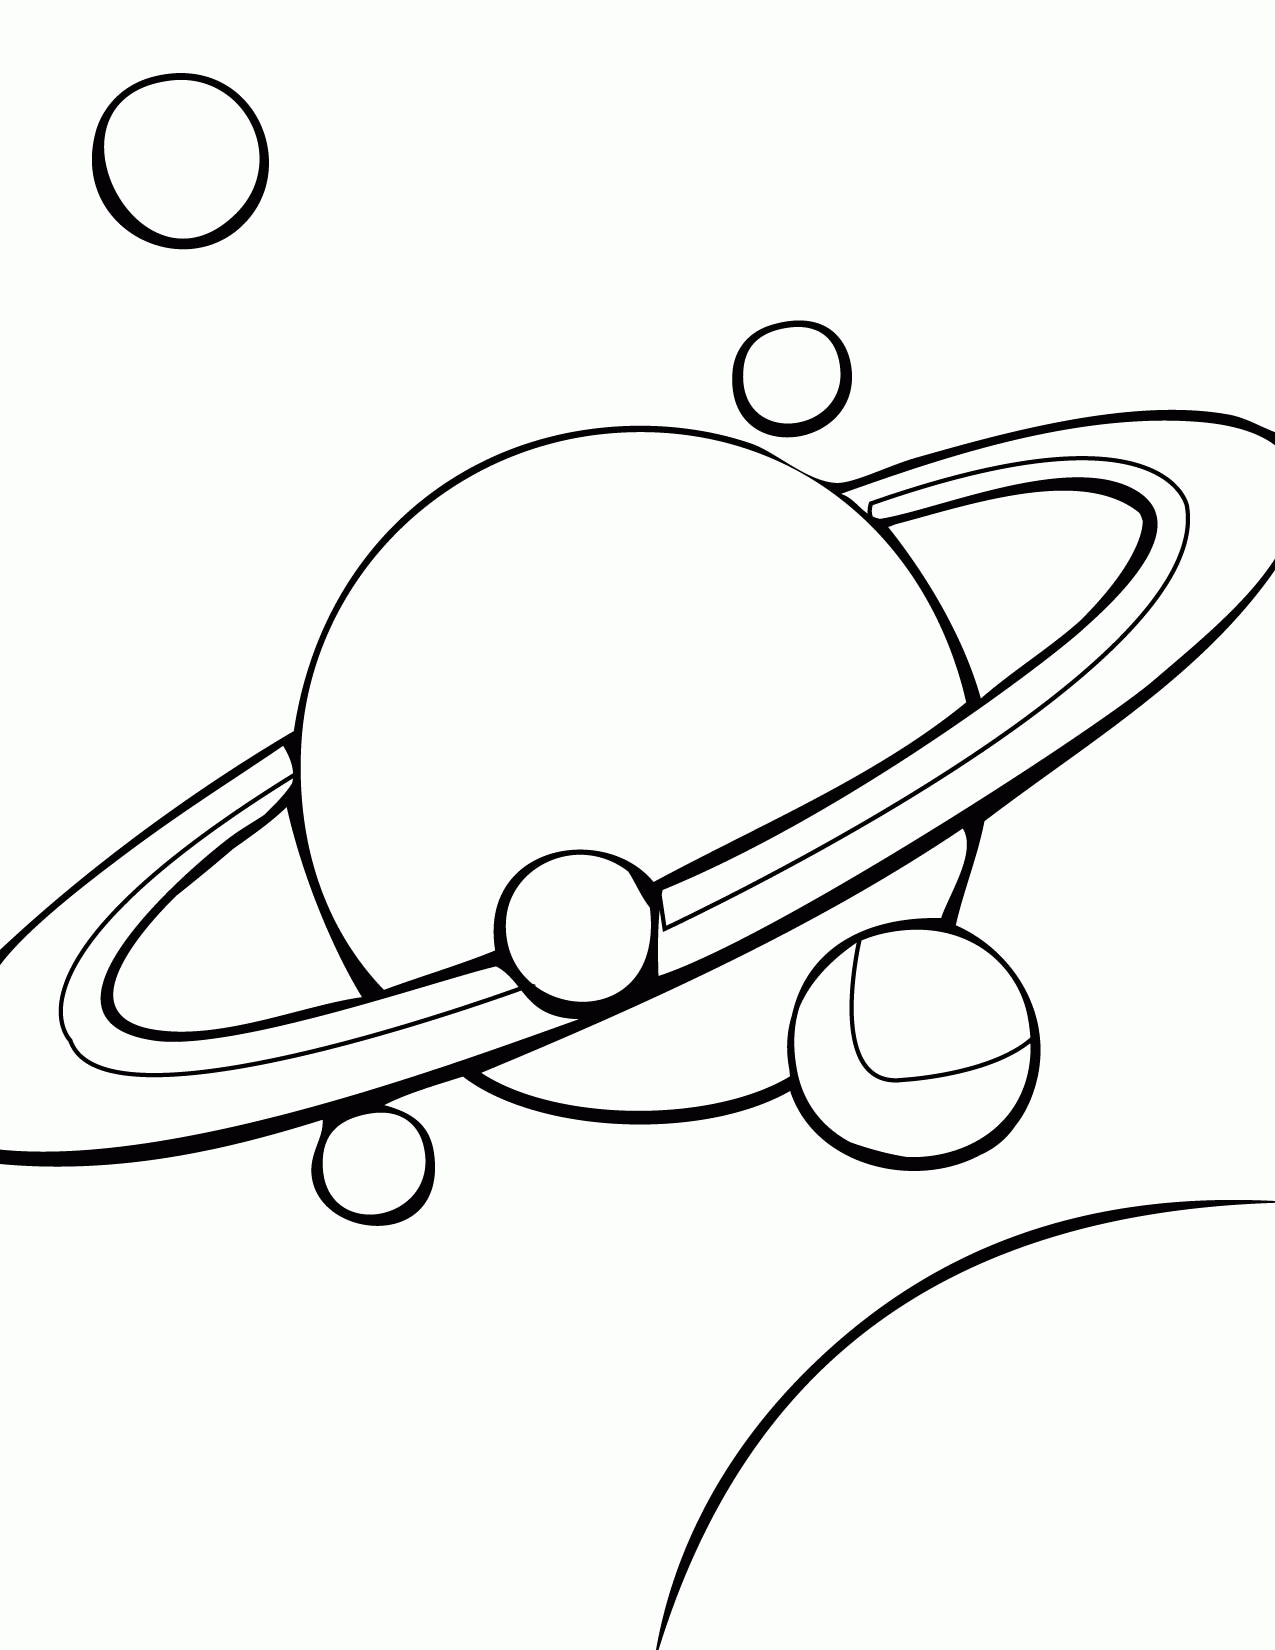 Saturn Coloring Page - Handipoints